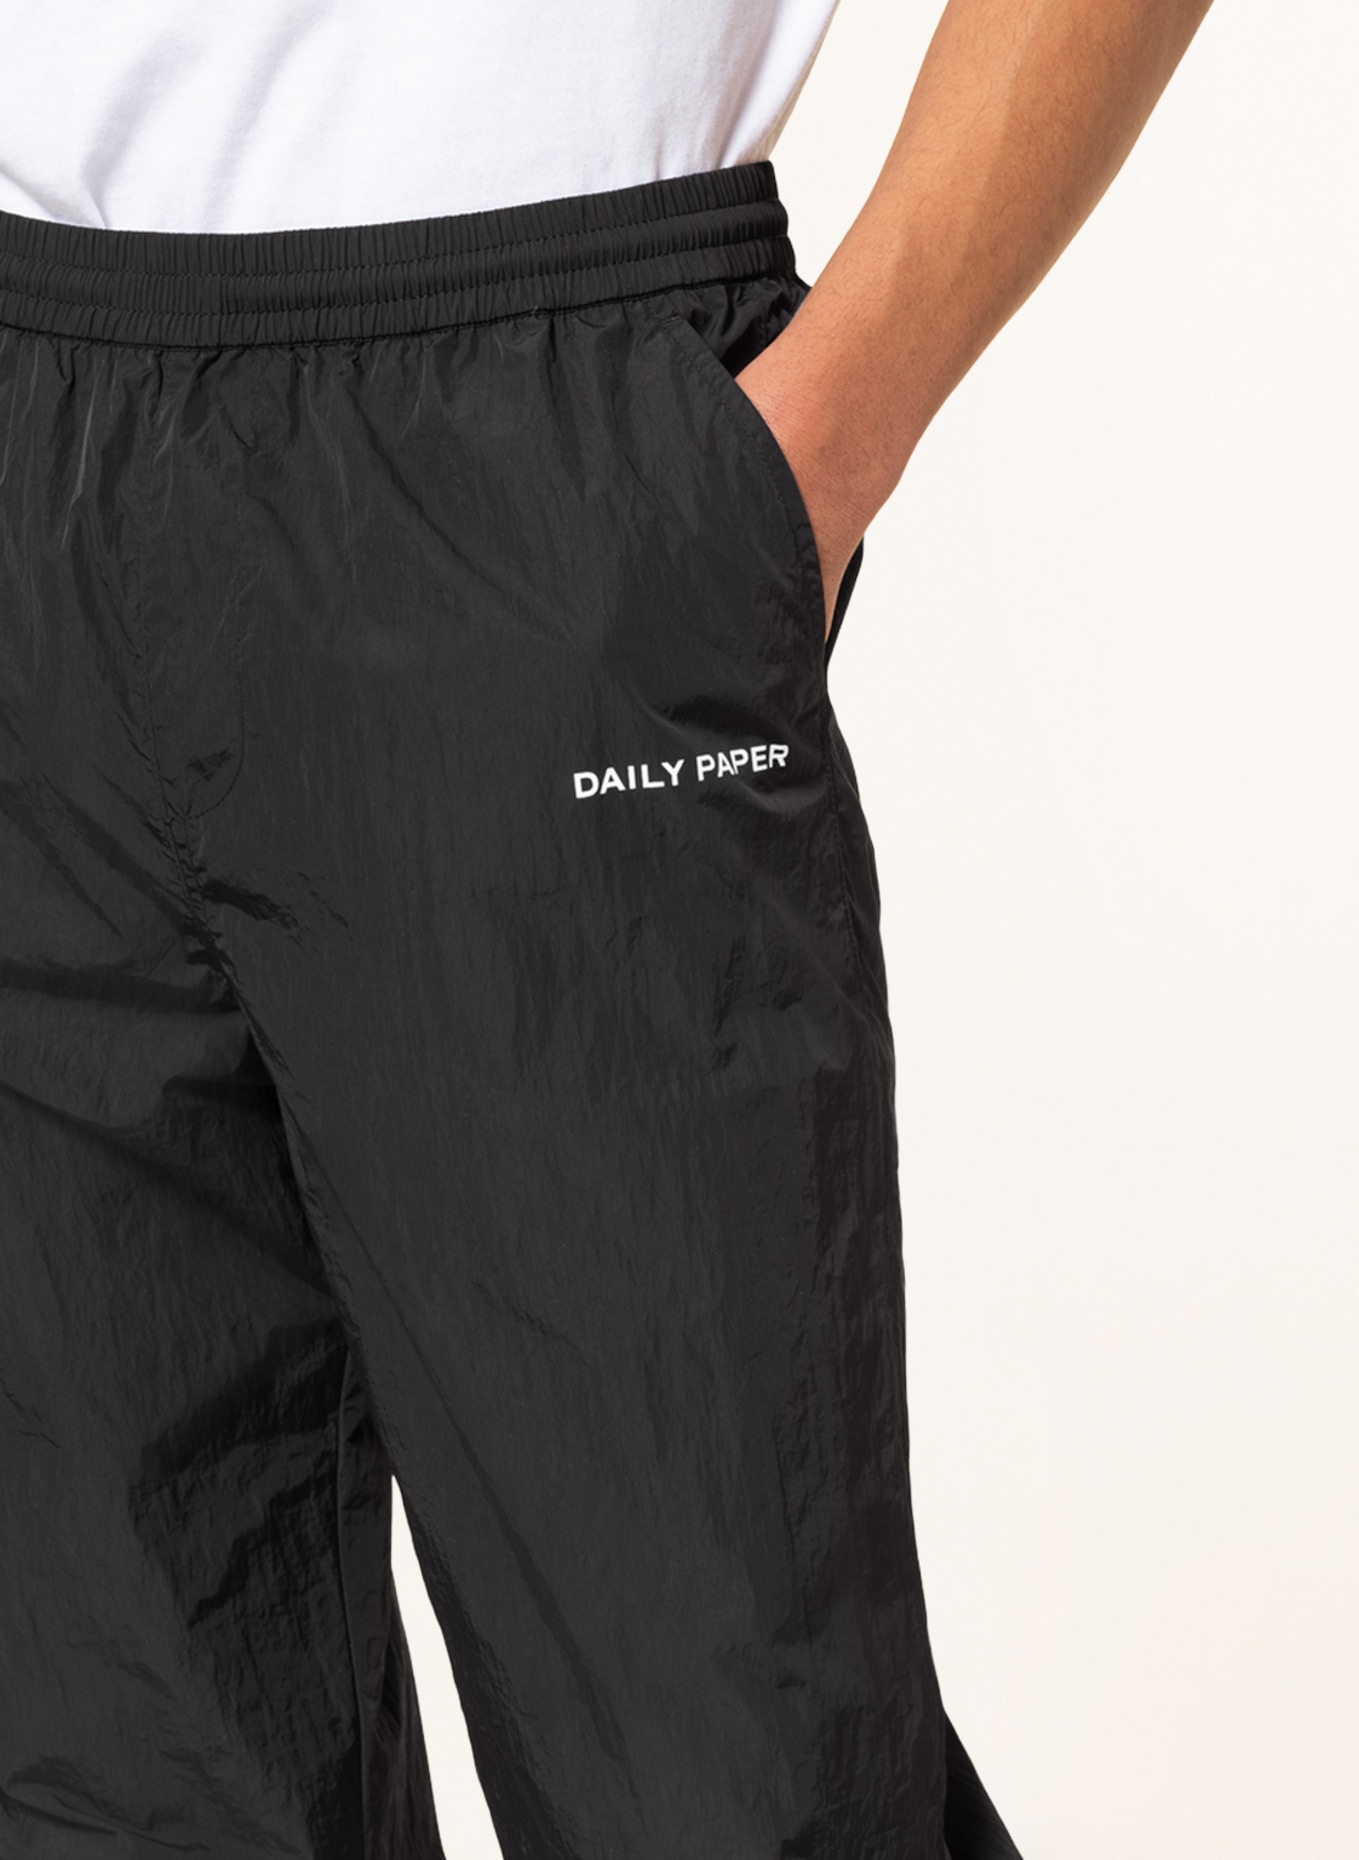 DAILY PAPER Pants EWARD in jogger style, Color: BLACK (Image 5)